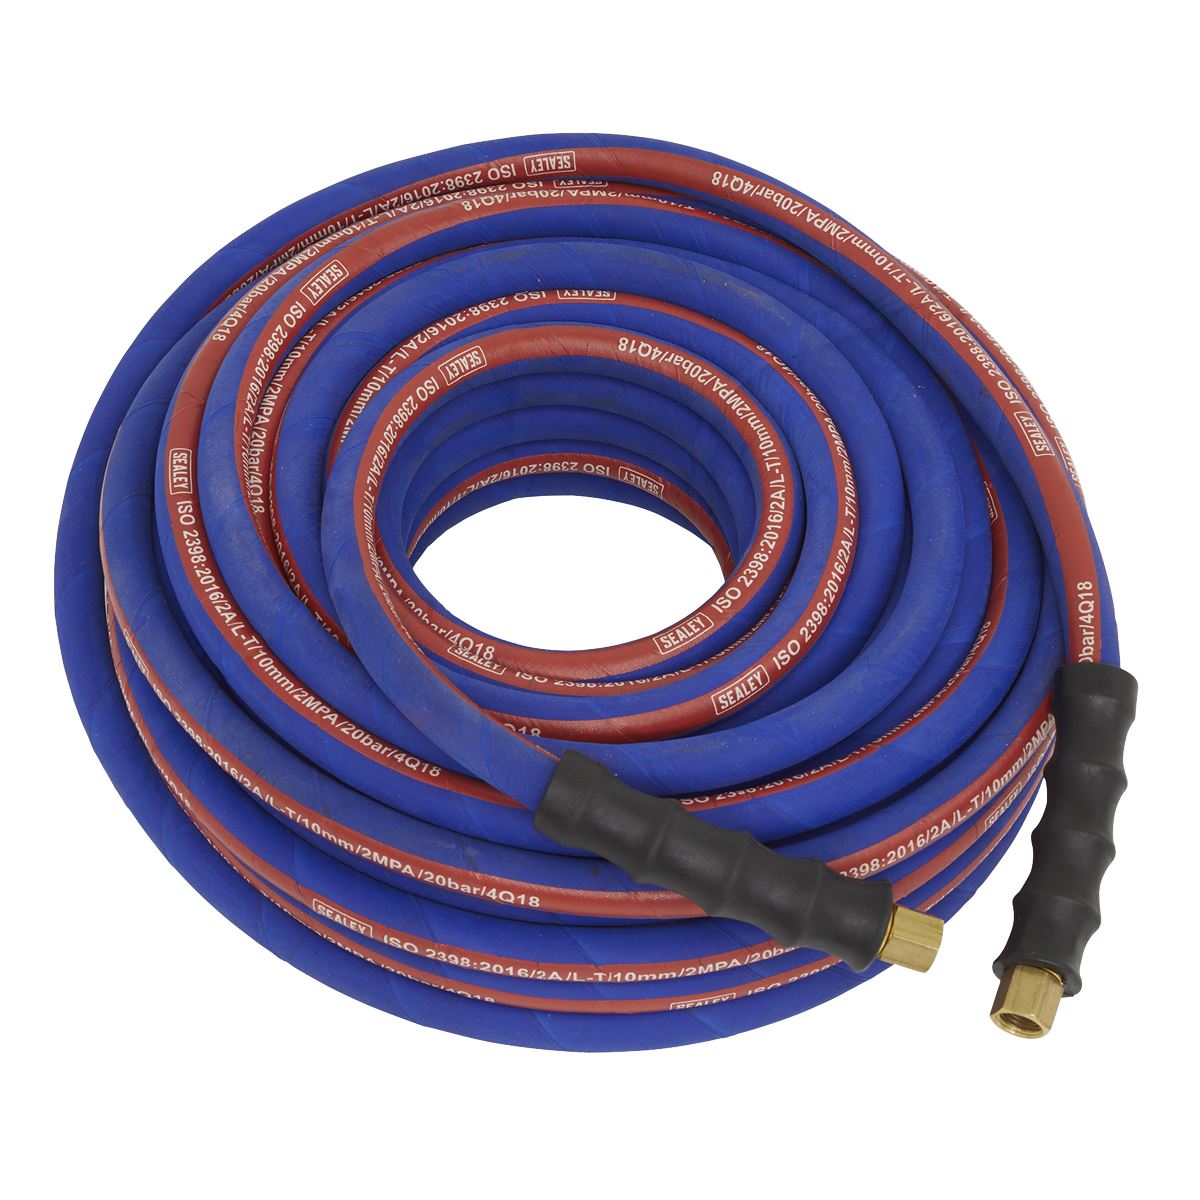 Sealey Air Hose 20m x Ø8mm with 1/4"BSP Unions Extra Heavy-Duty